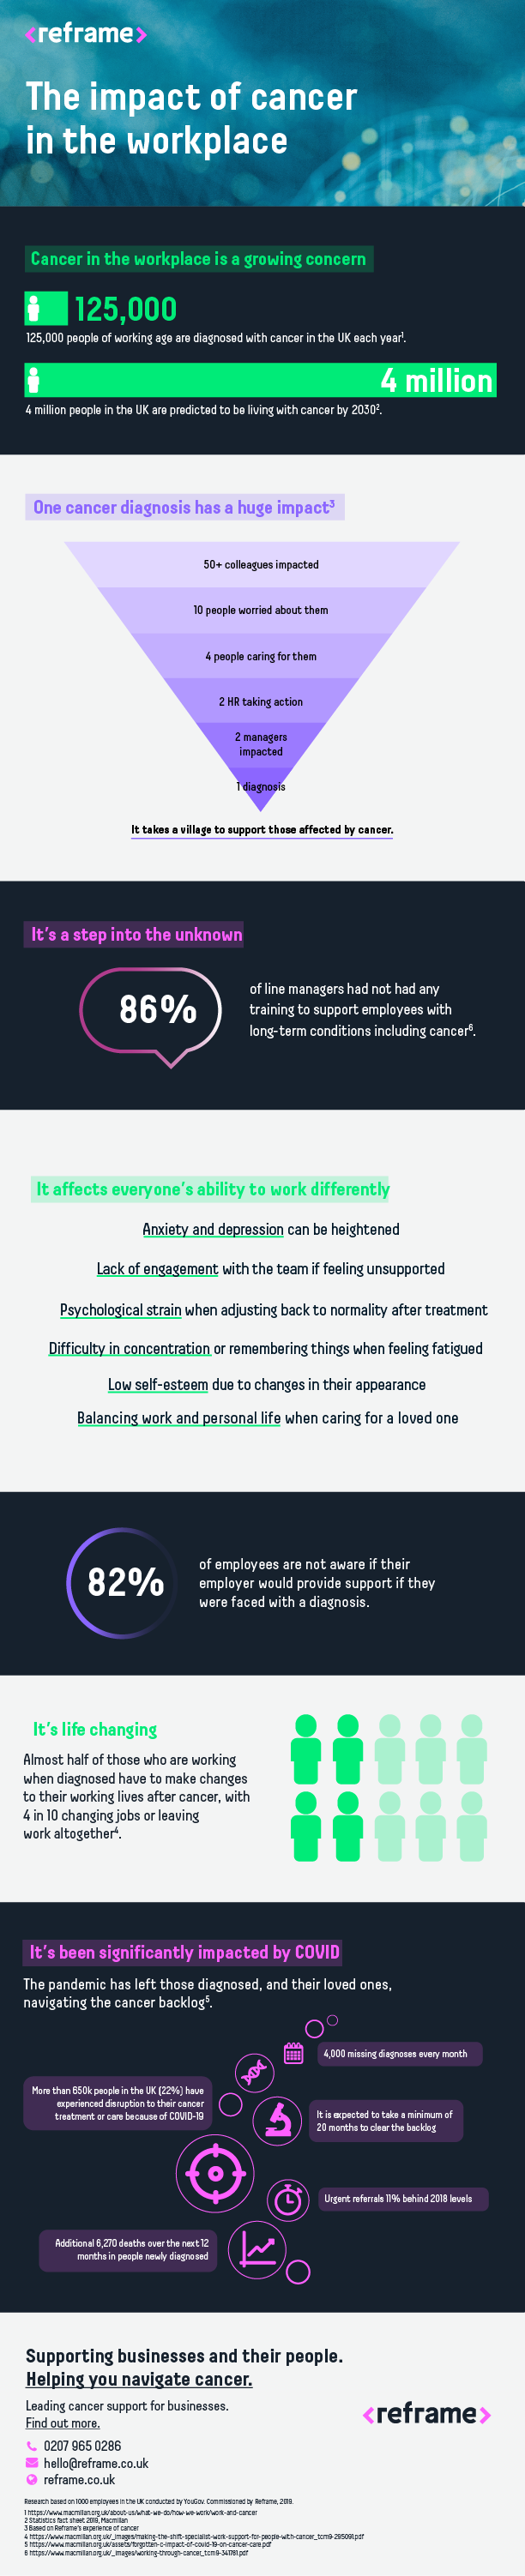 Impact of cancer infographic